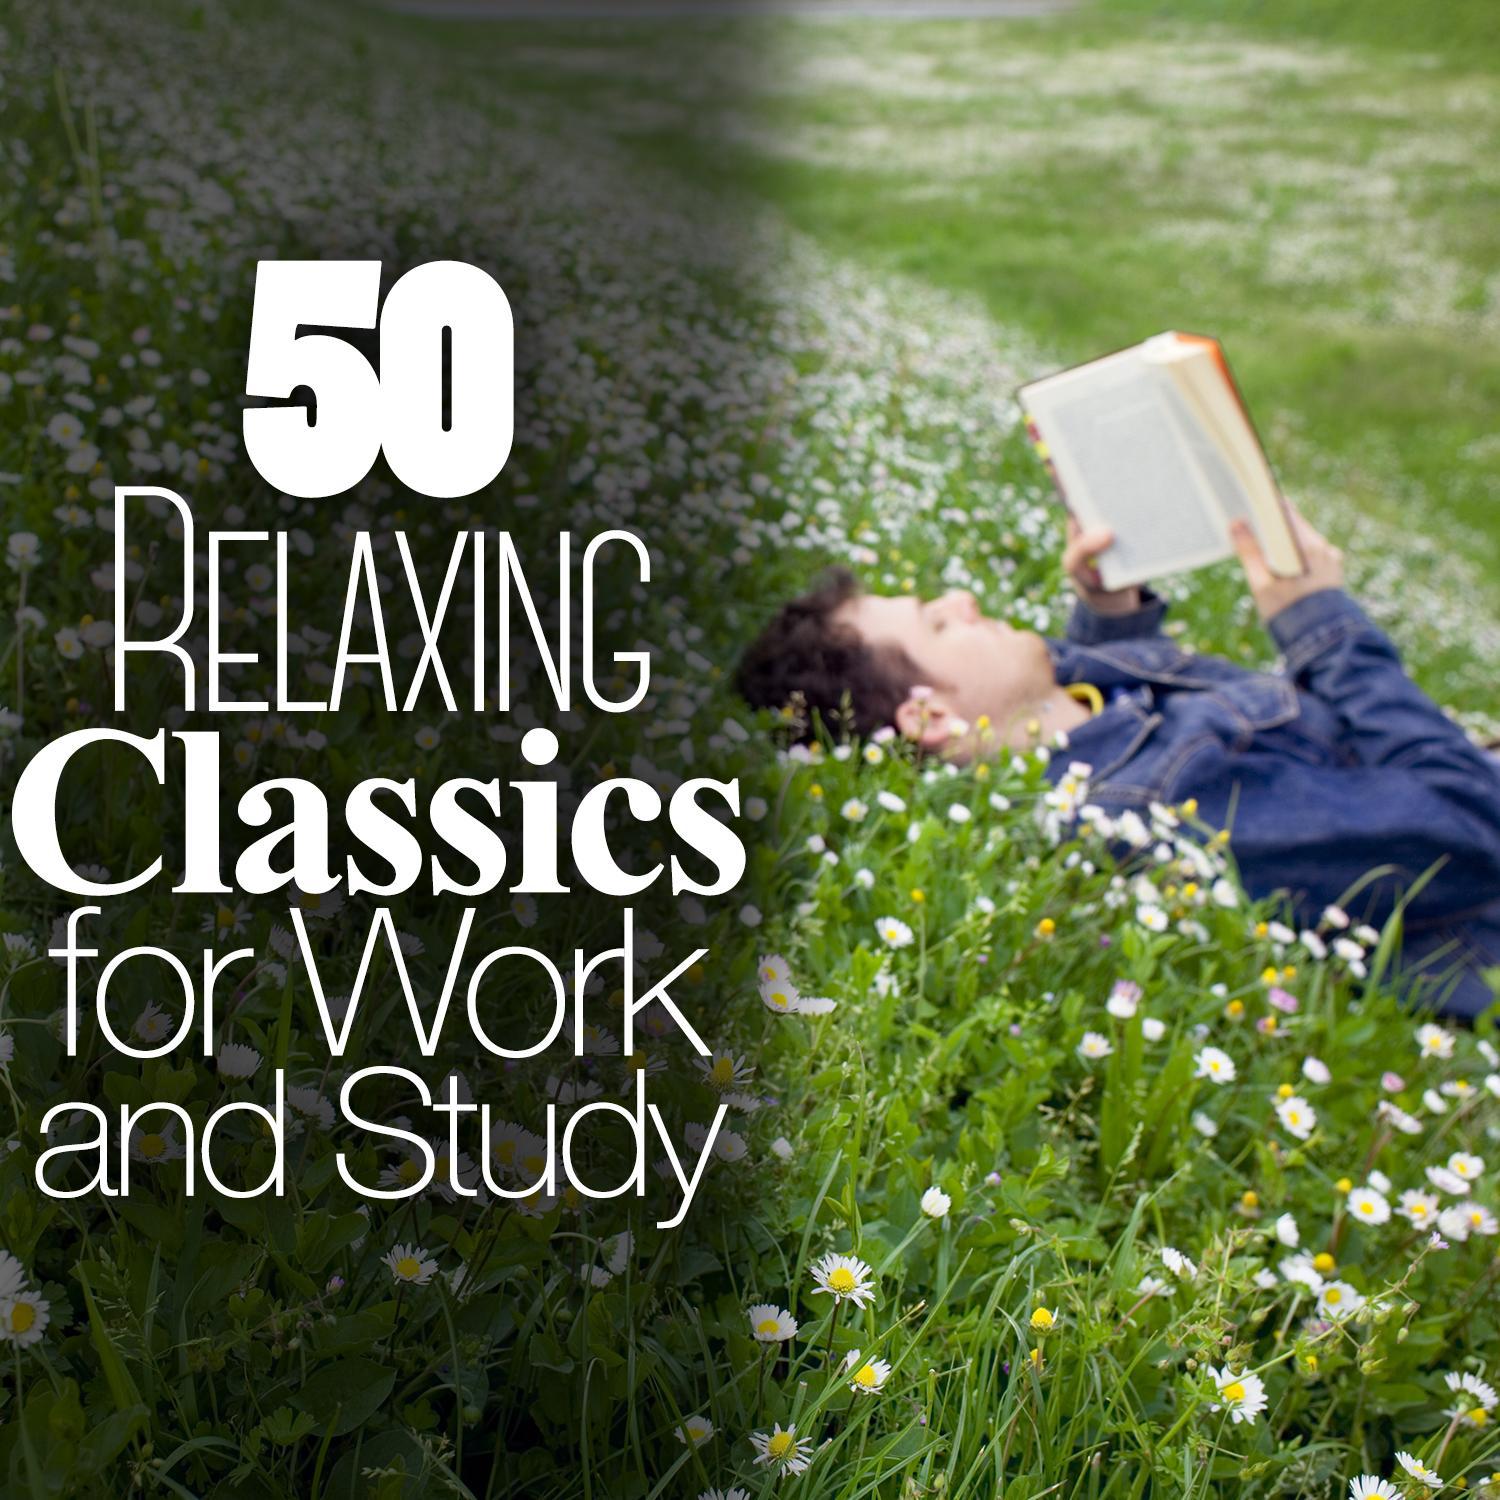 50 Relaxing Classics for Work and Study